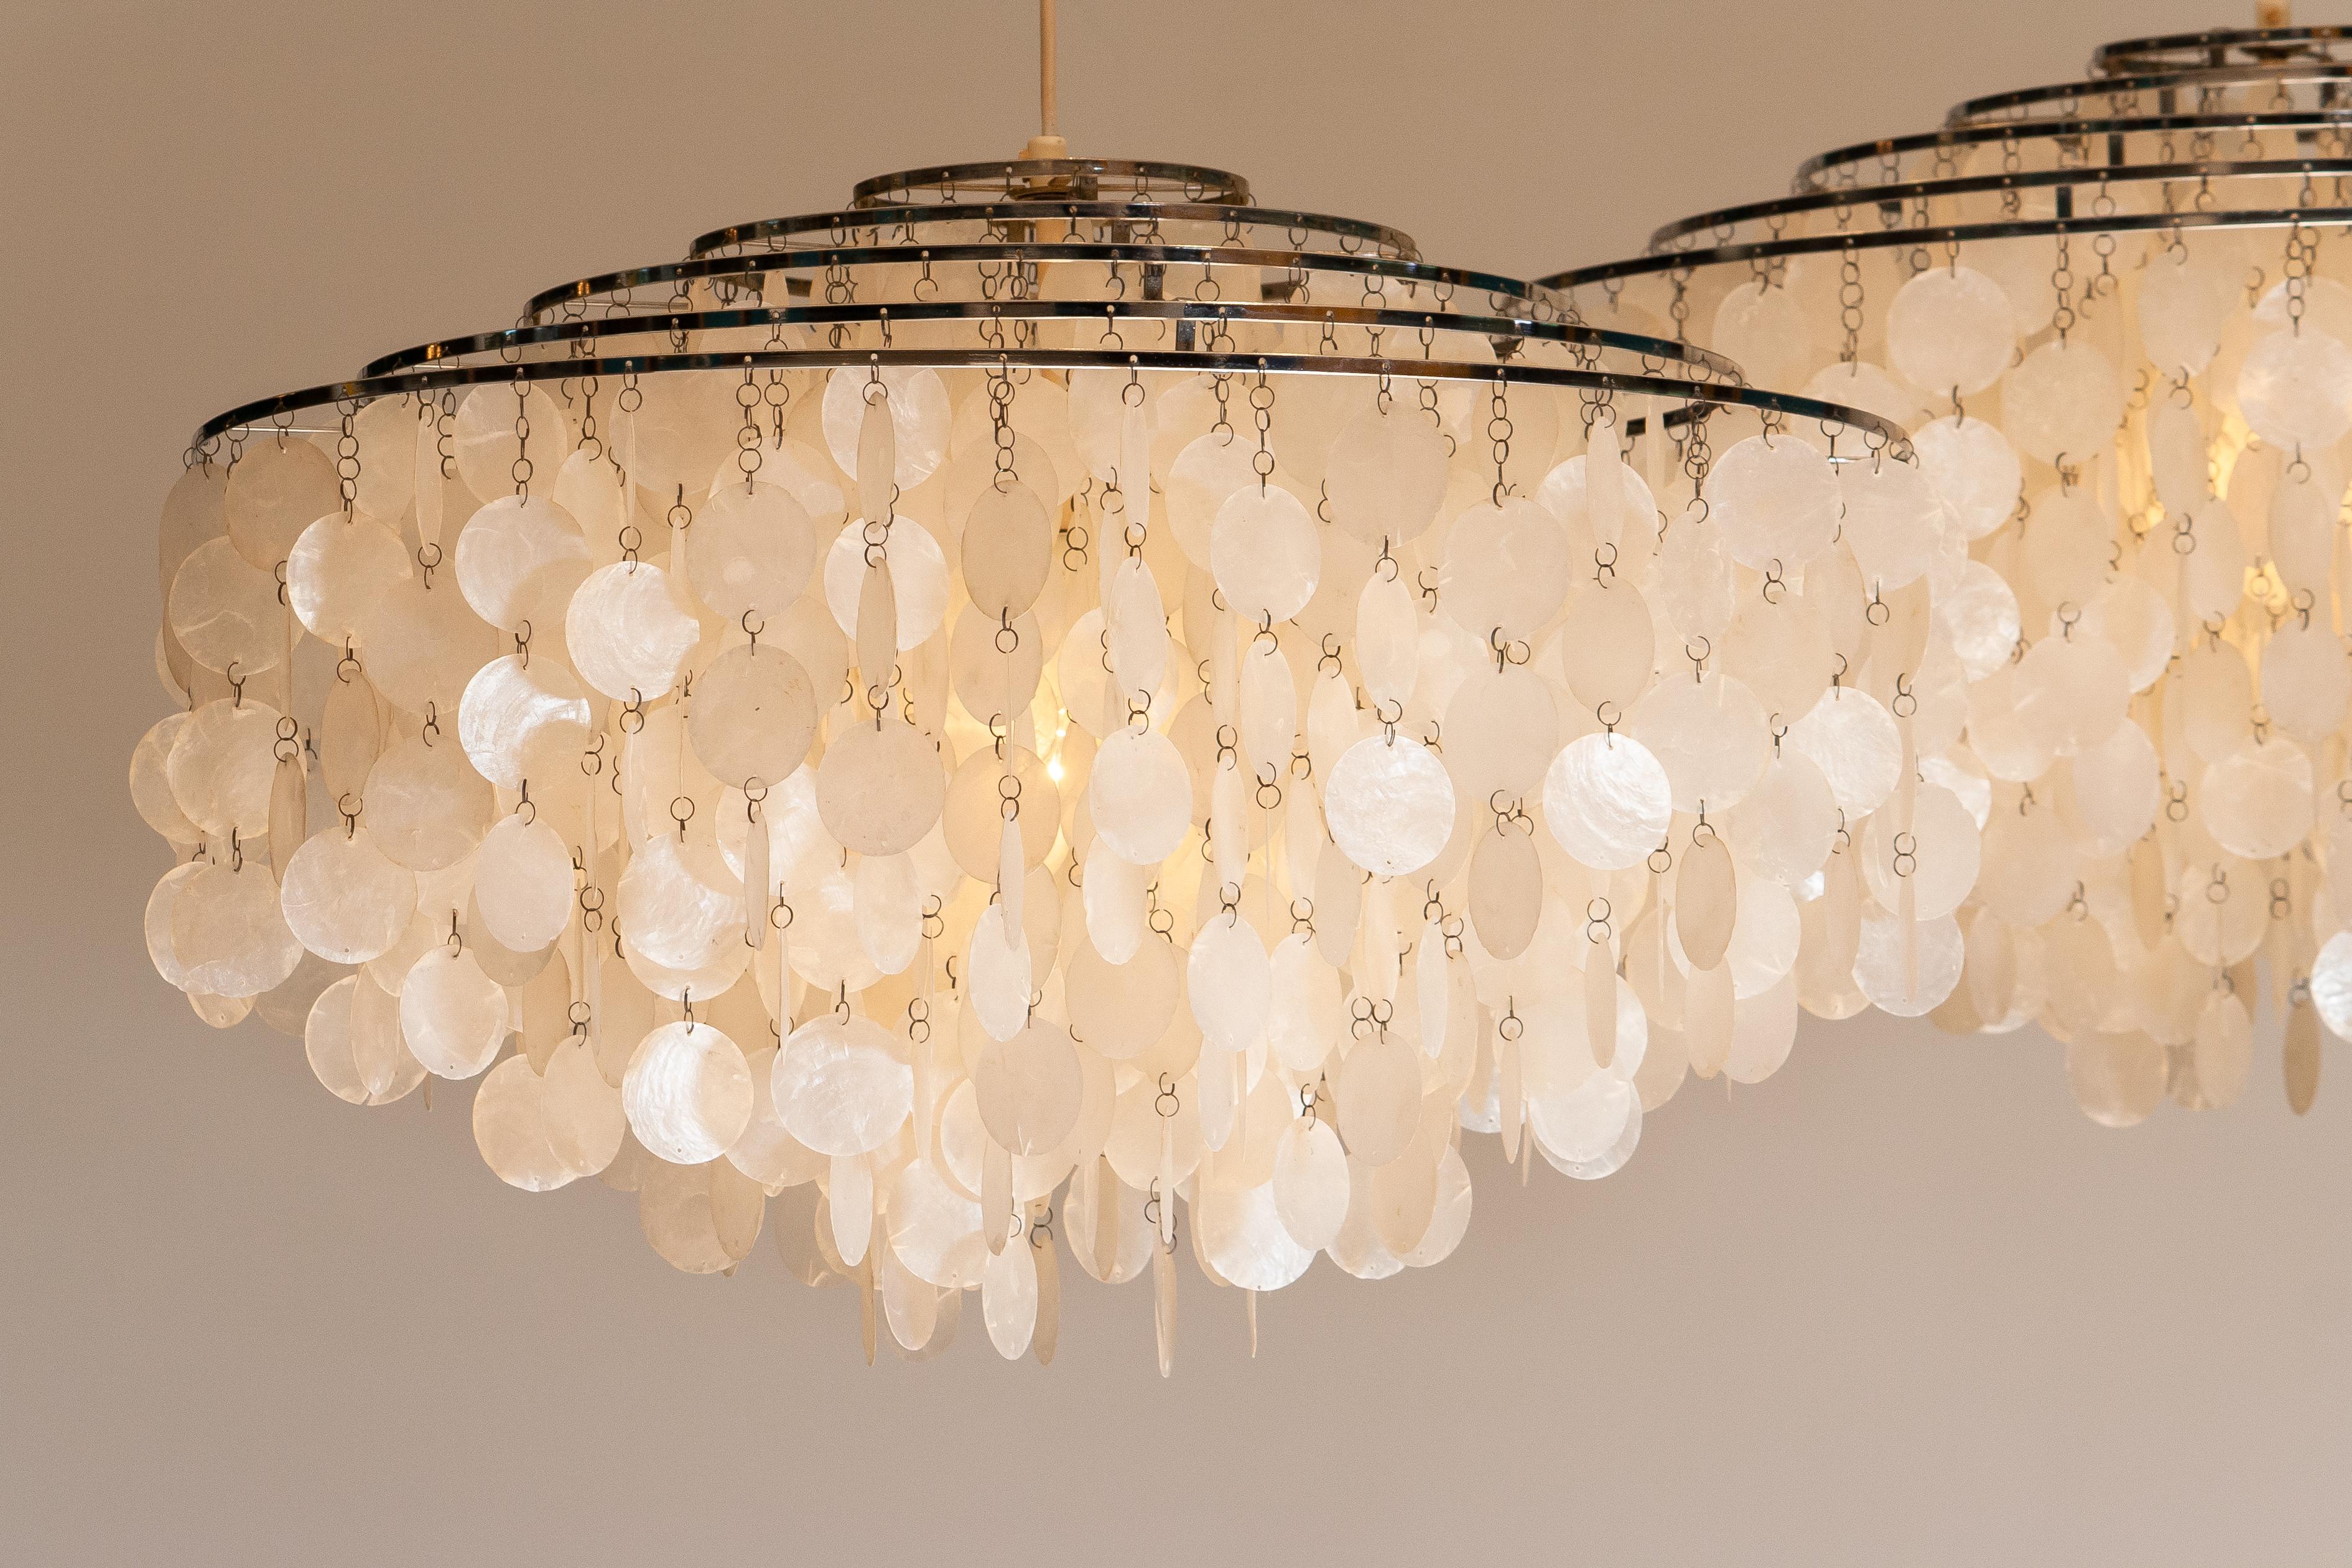 Scandinavian Modern Pair of Extra Large Capiz Shell Chandeliers by Verner Panton for Luber AG. Swiss